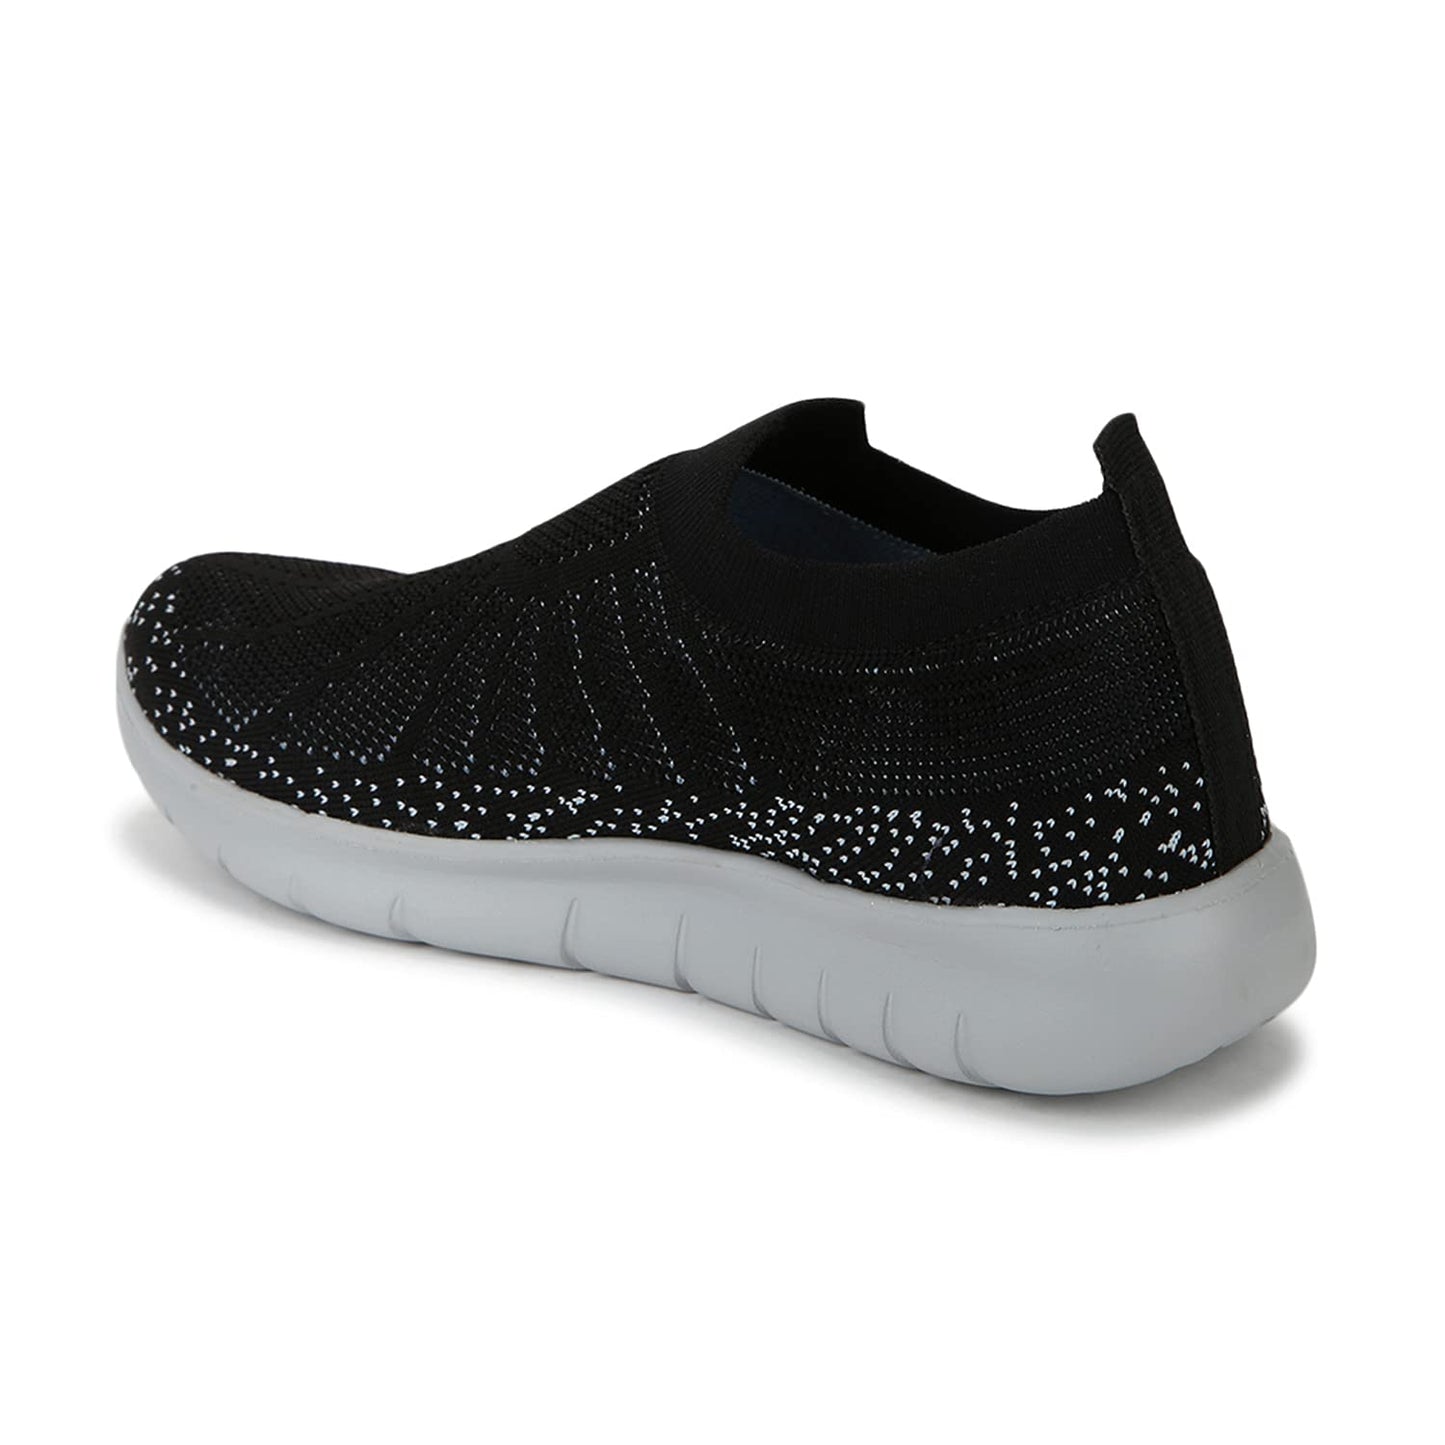 Marc Loire Women's Lightweight Athleisure Knitted Active Wear Slip-On Sneaker Shoes for Sports, Athletics, and Walking (Black, Numeric_3)